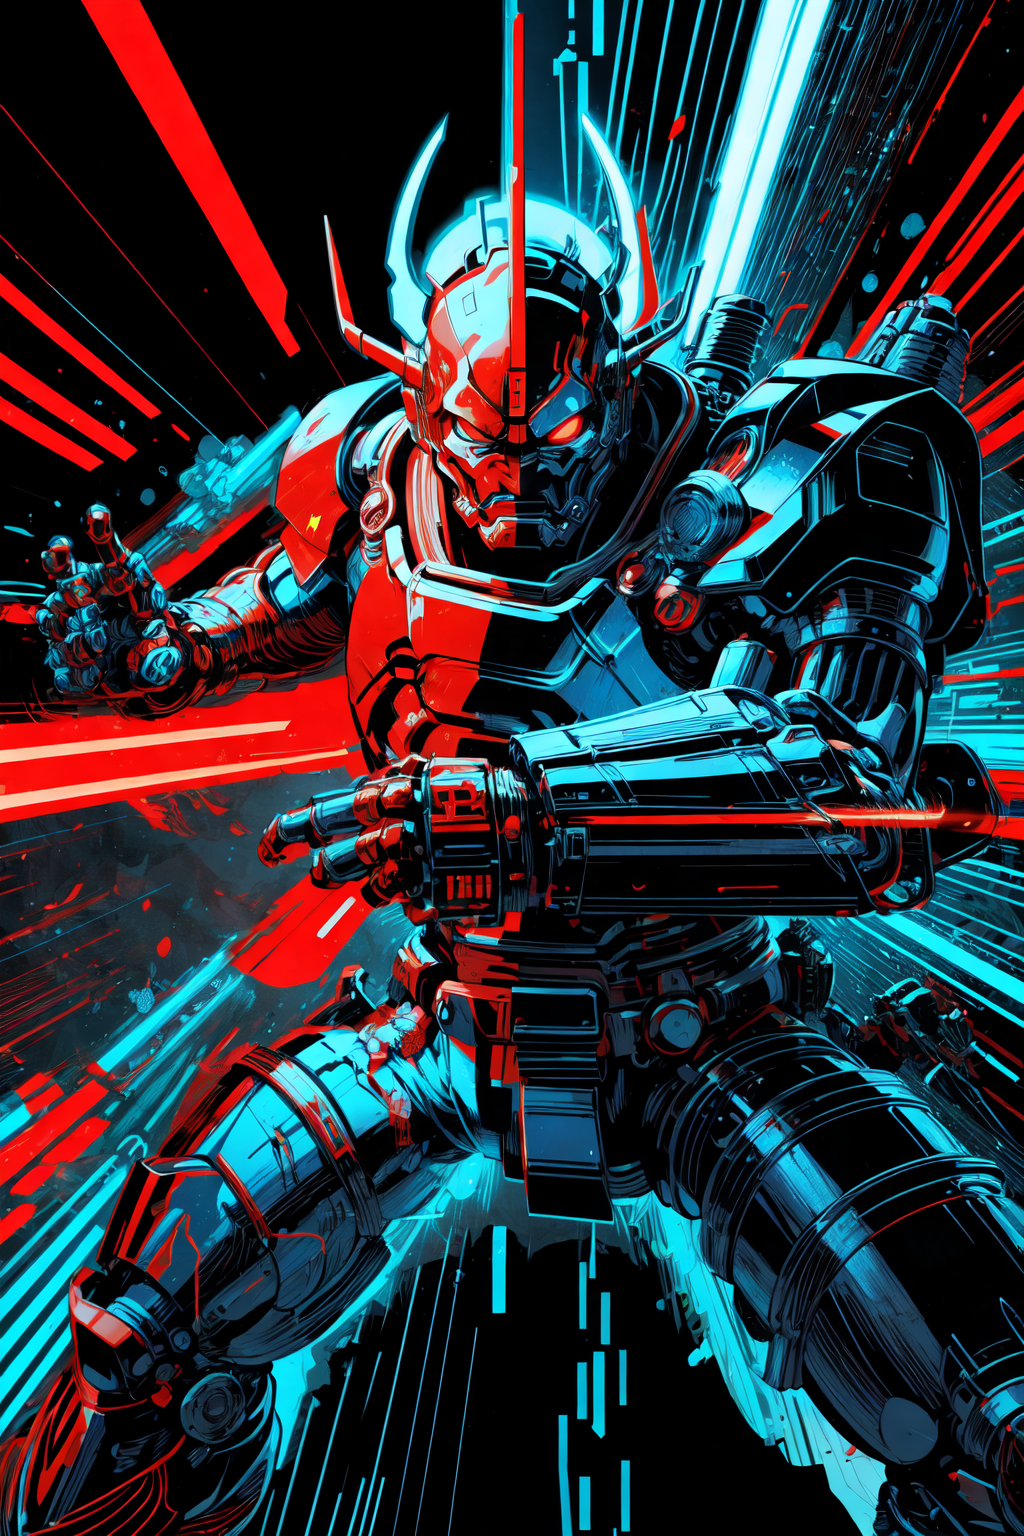 A robot with a sword in its hand is shown in a dynamic pose, with a red and blue background.